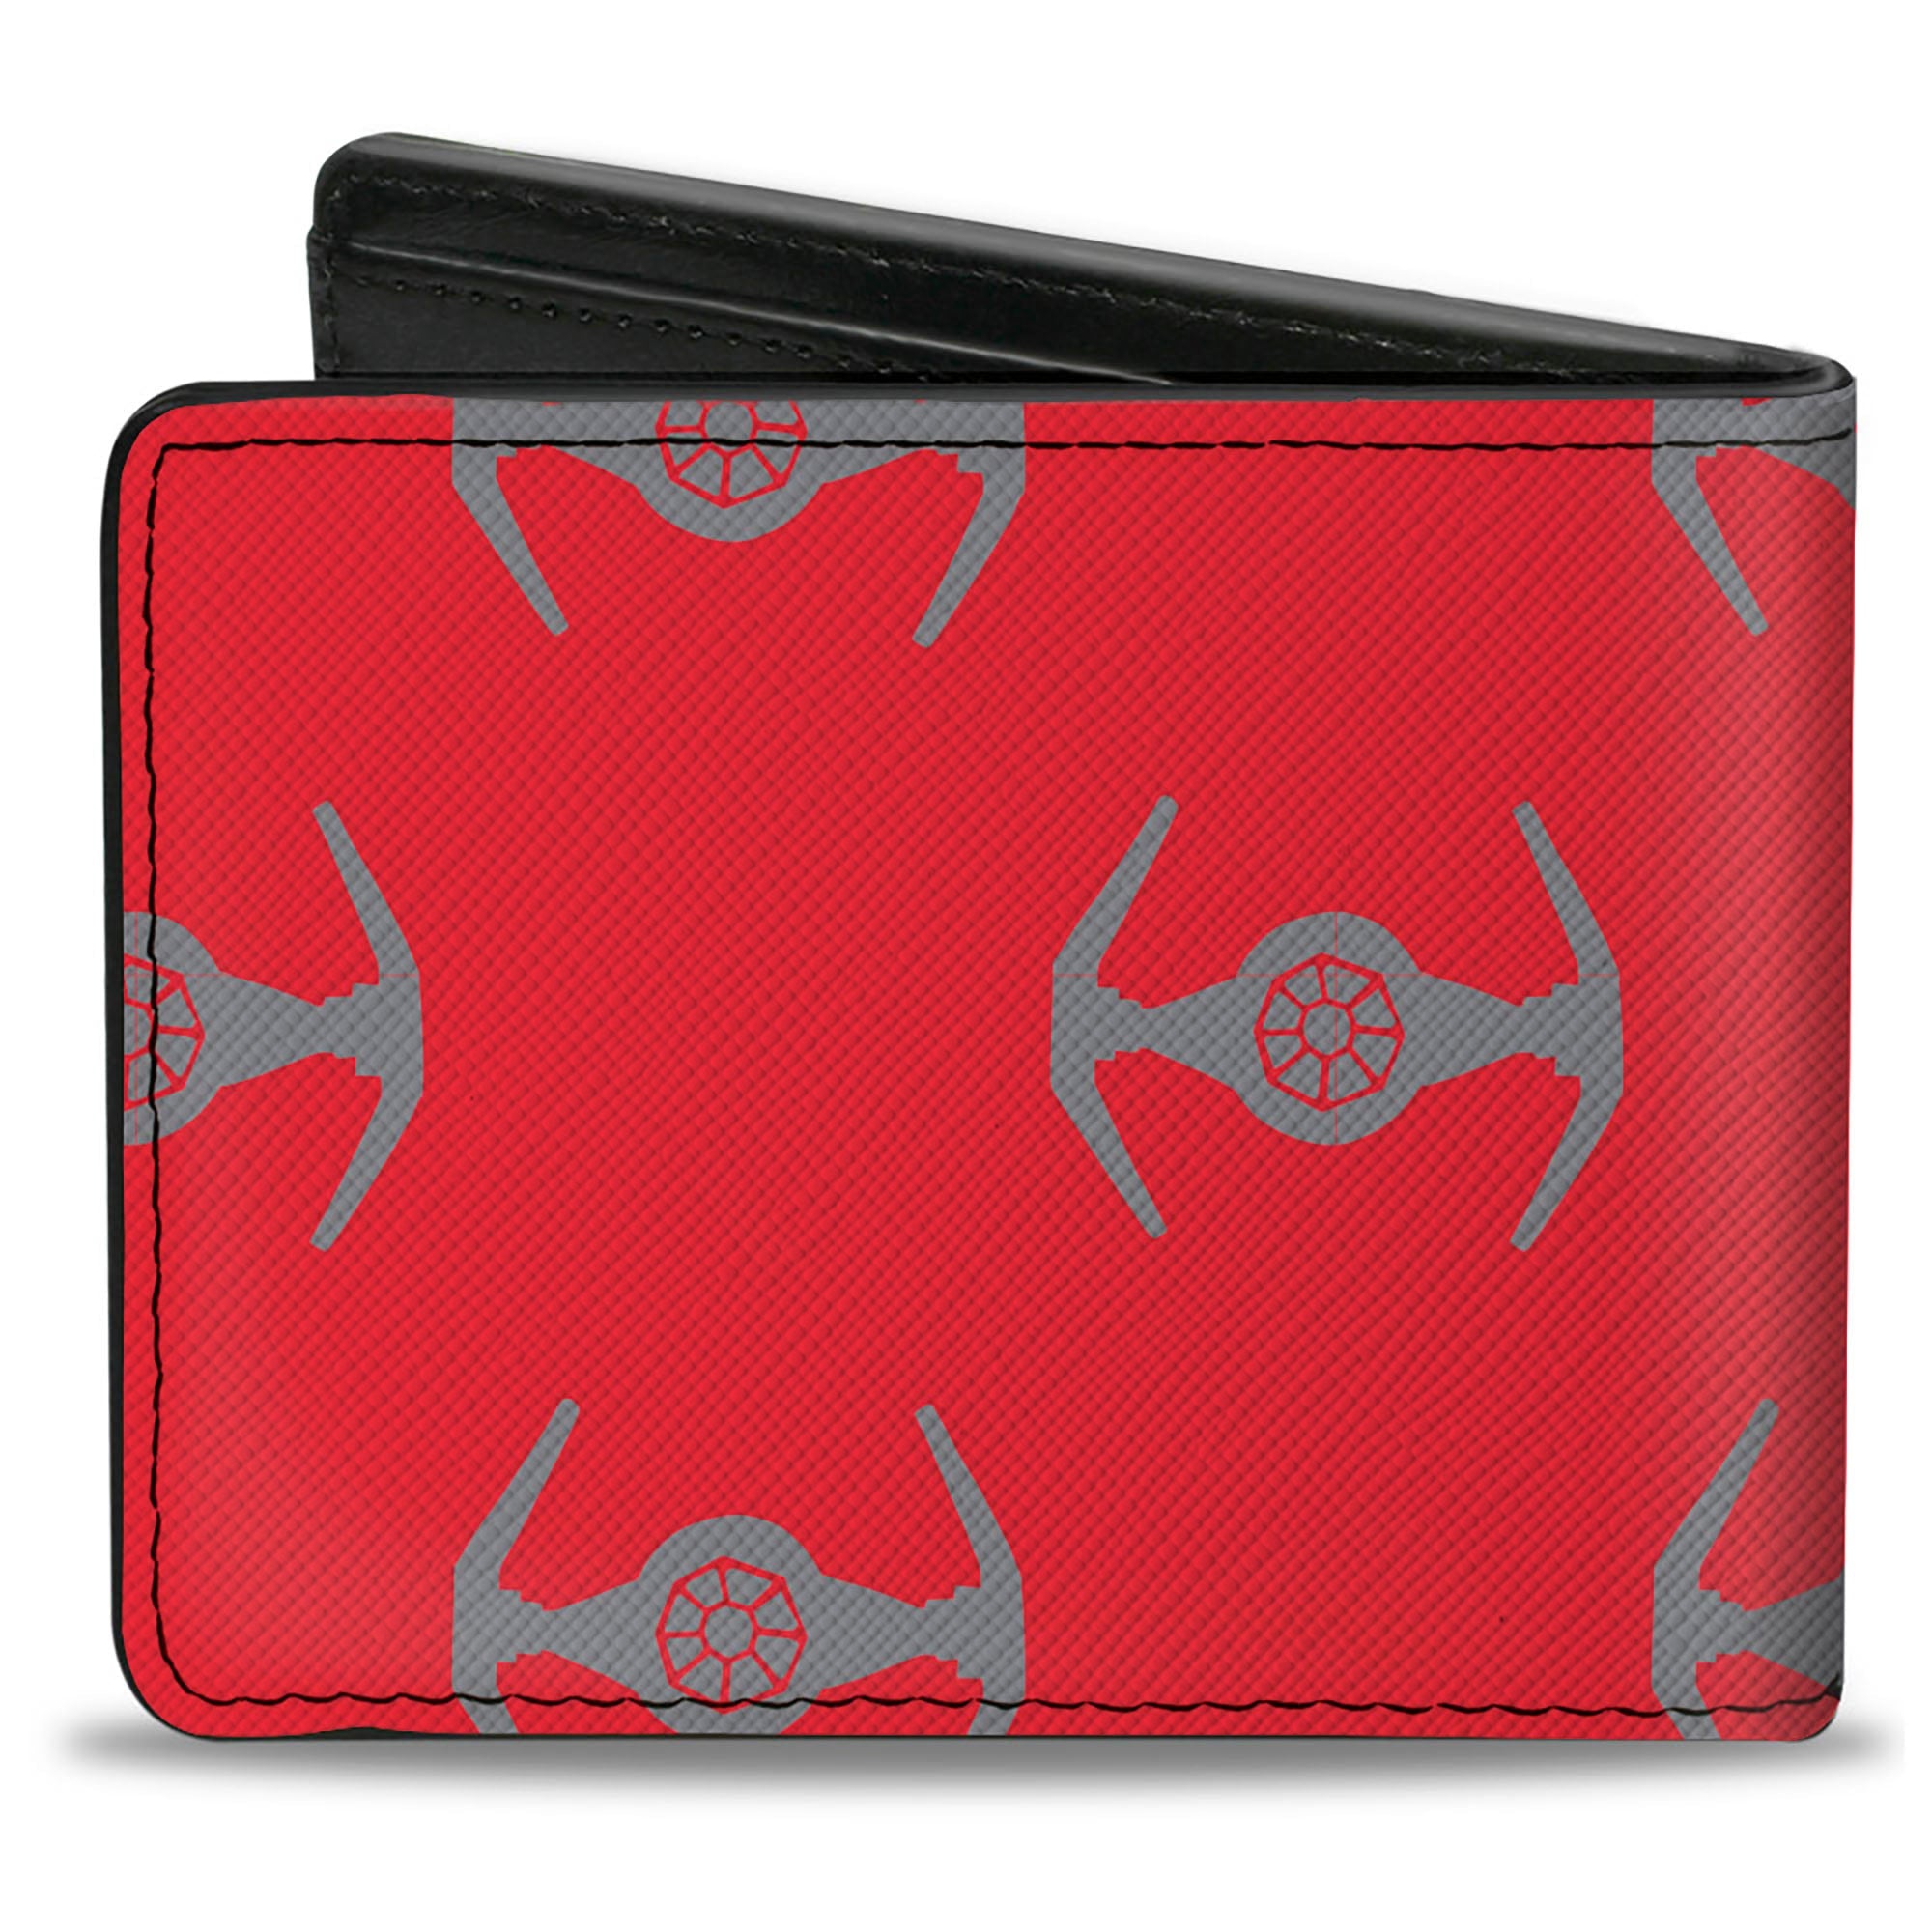 Bi-Fold Wallet - Star Wars Darth Vader Pose and TIE Fighter Icon Red/Gray